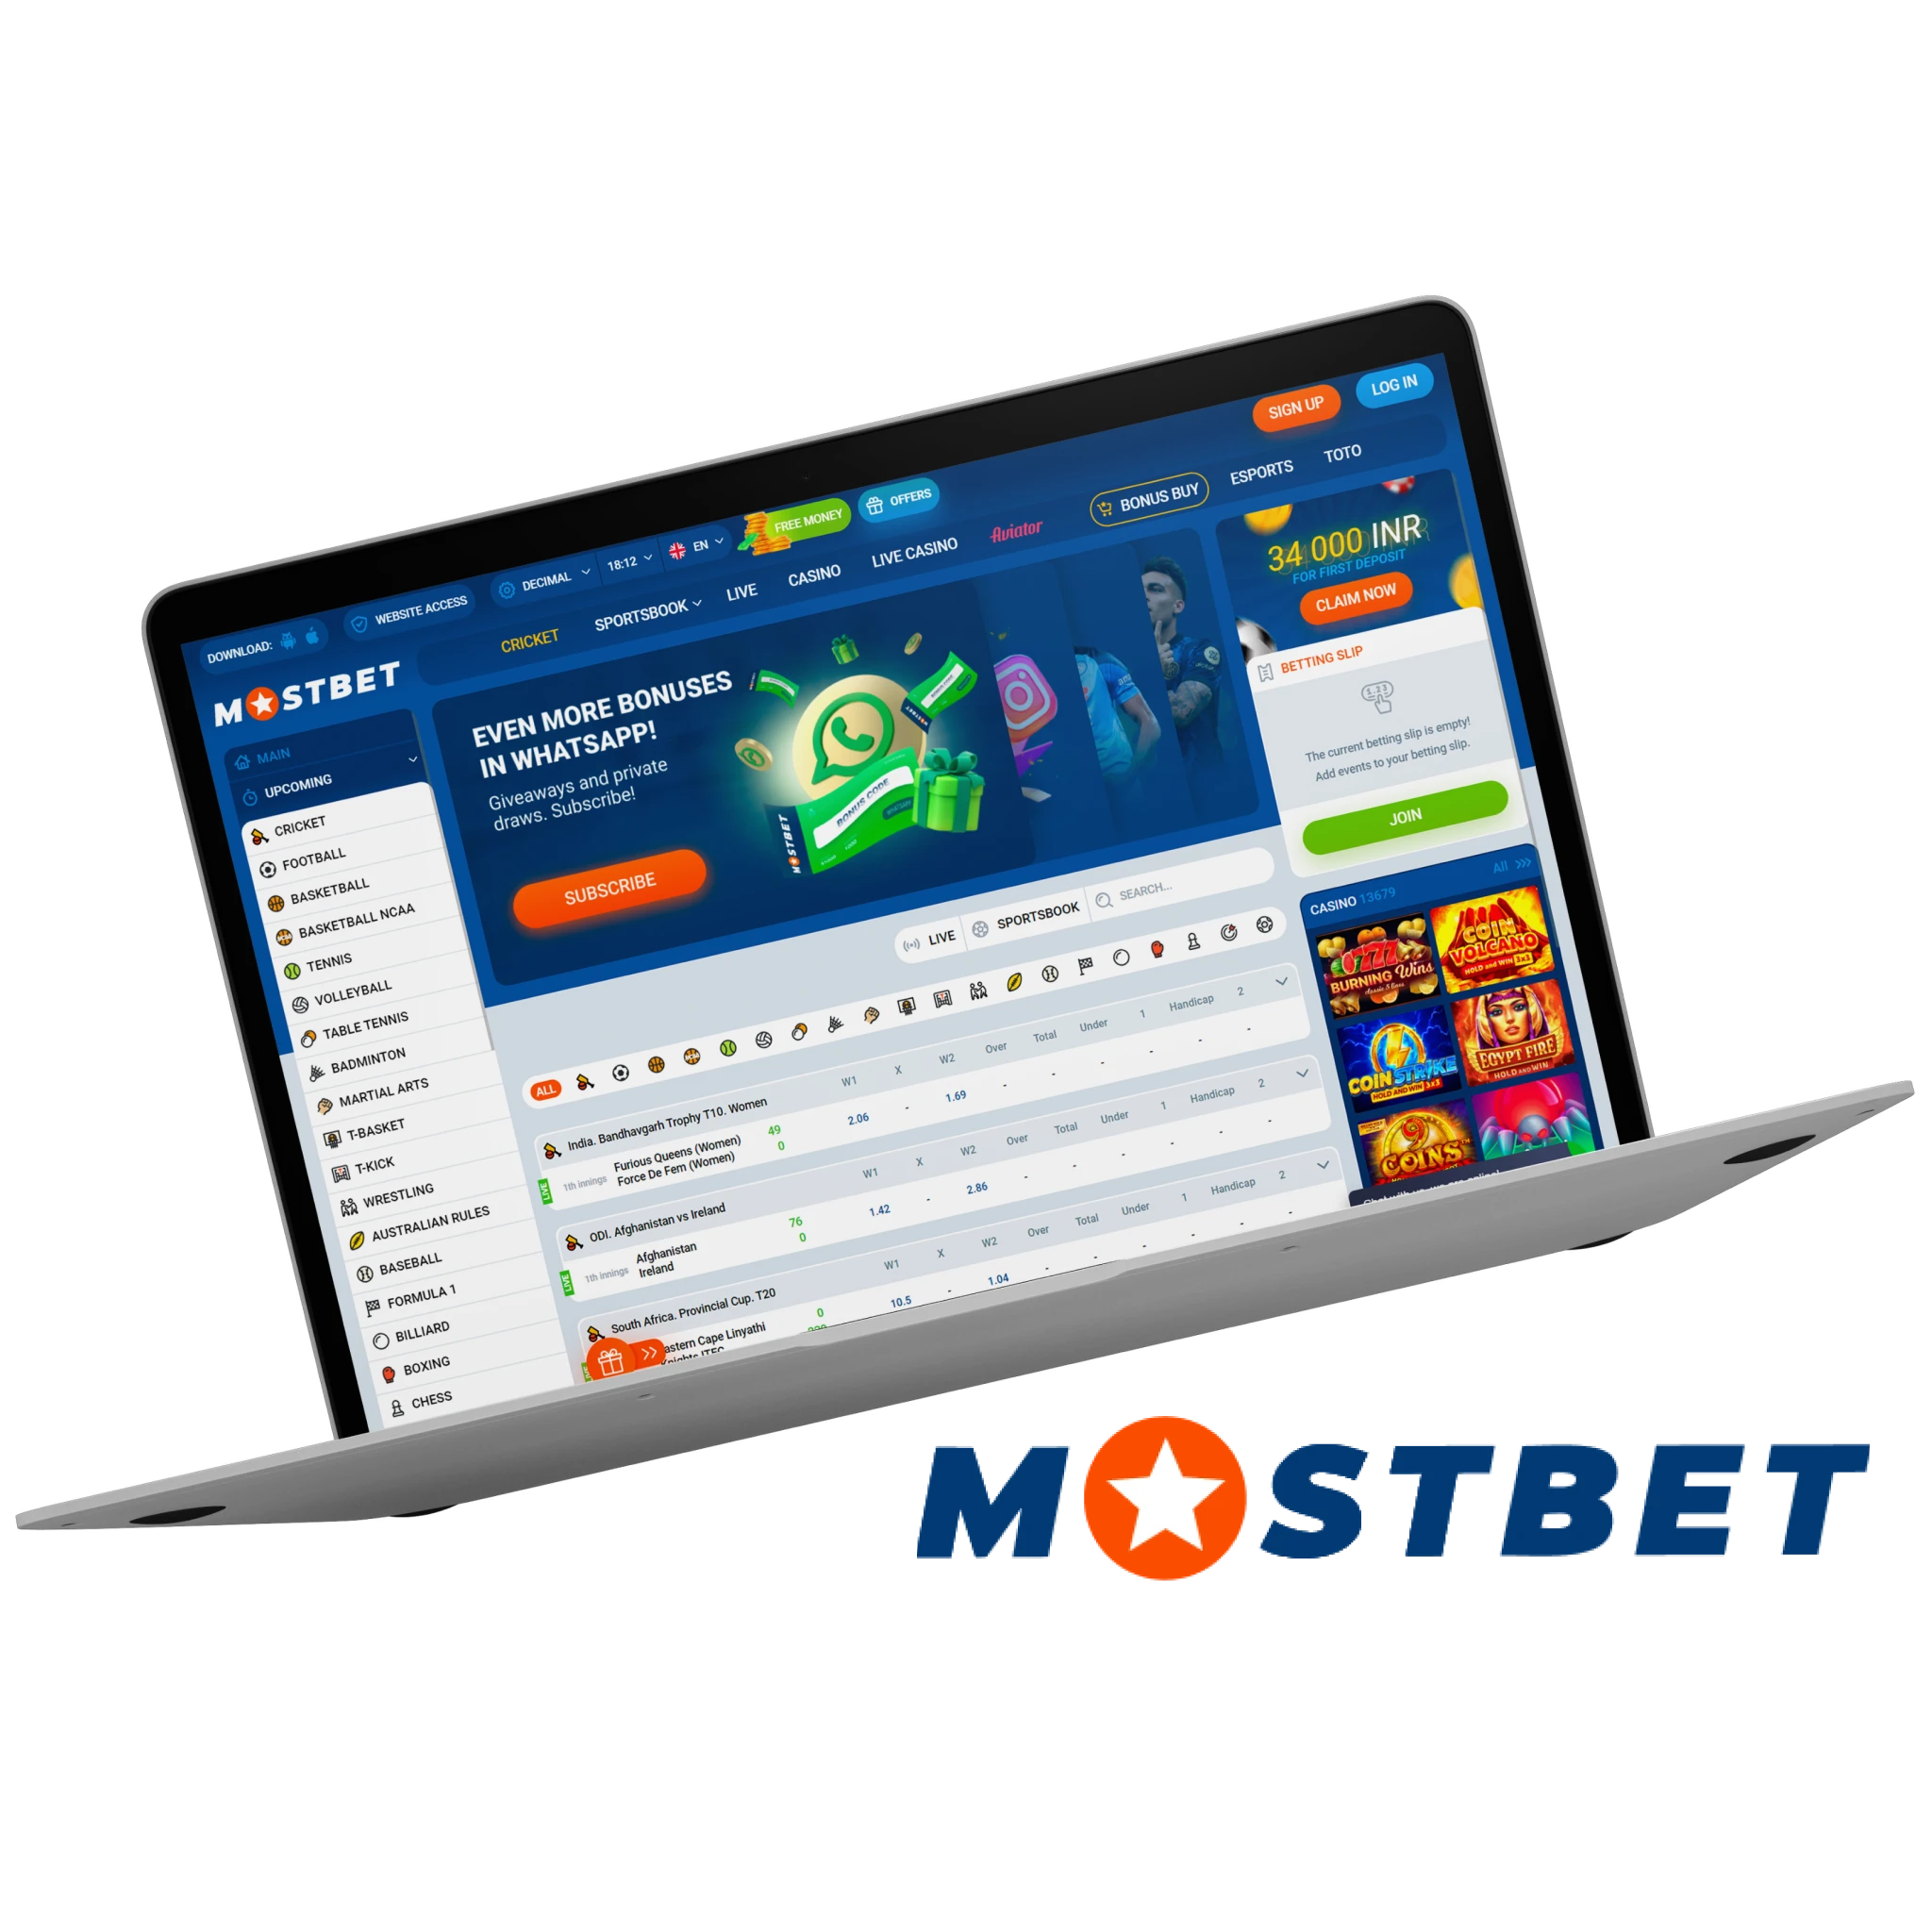  Mostbet offers a wide range of betting options for sports fans.